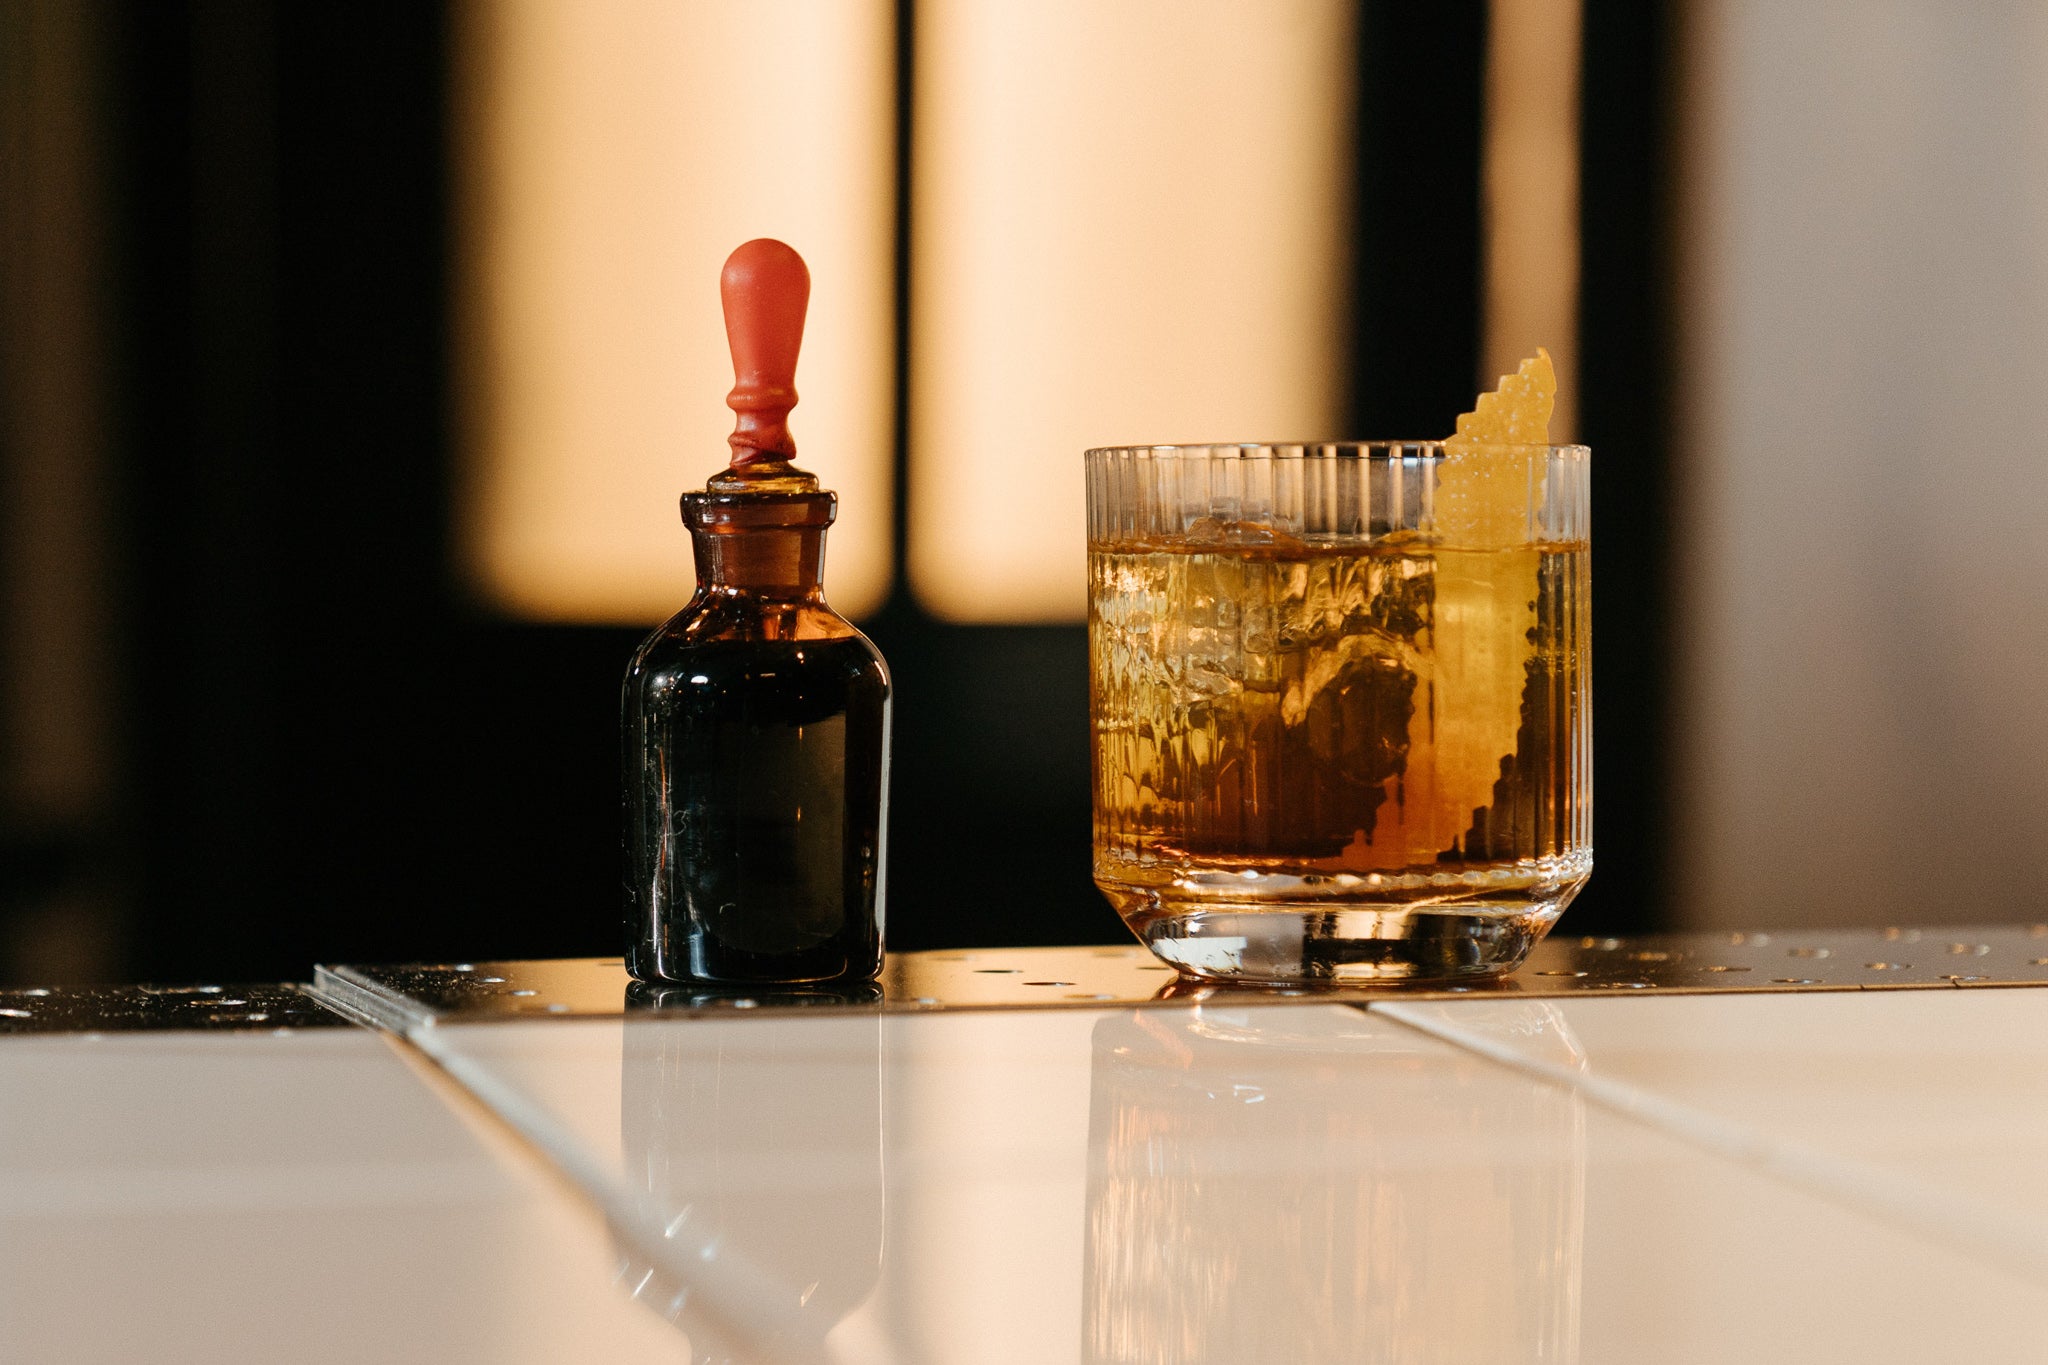 Bitters tincture glass beside an old fashioned